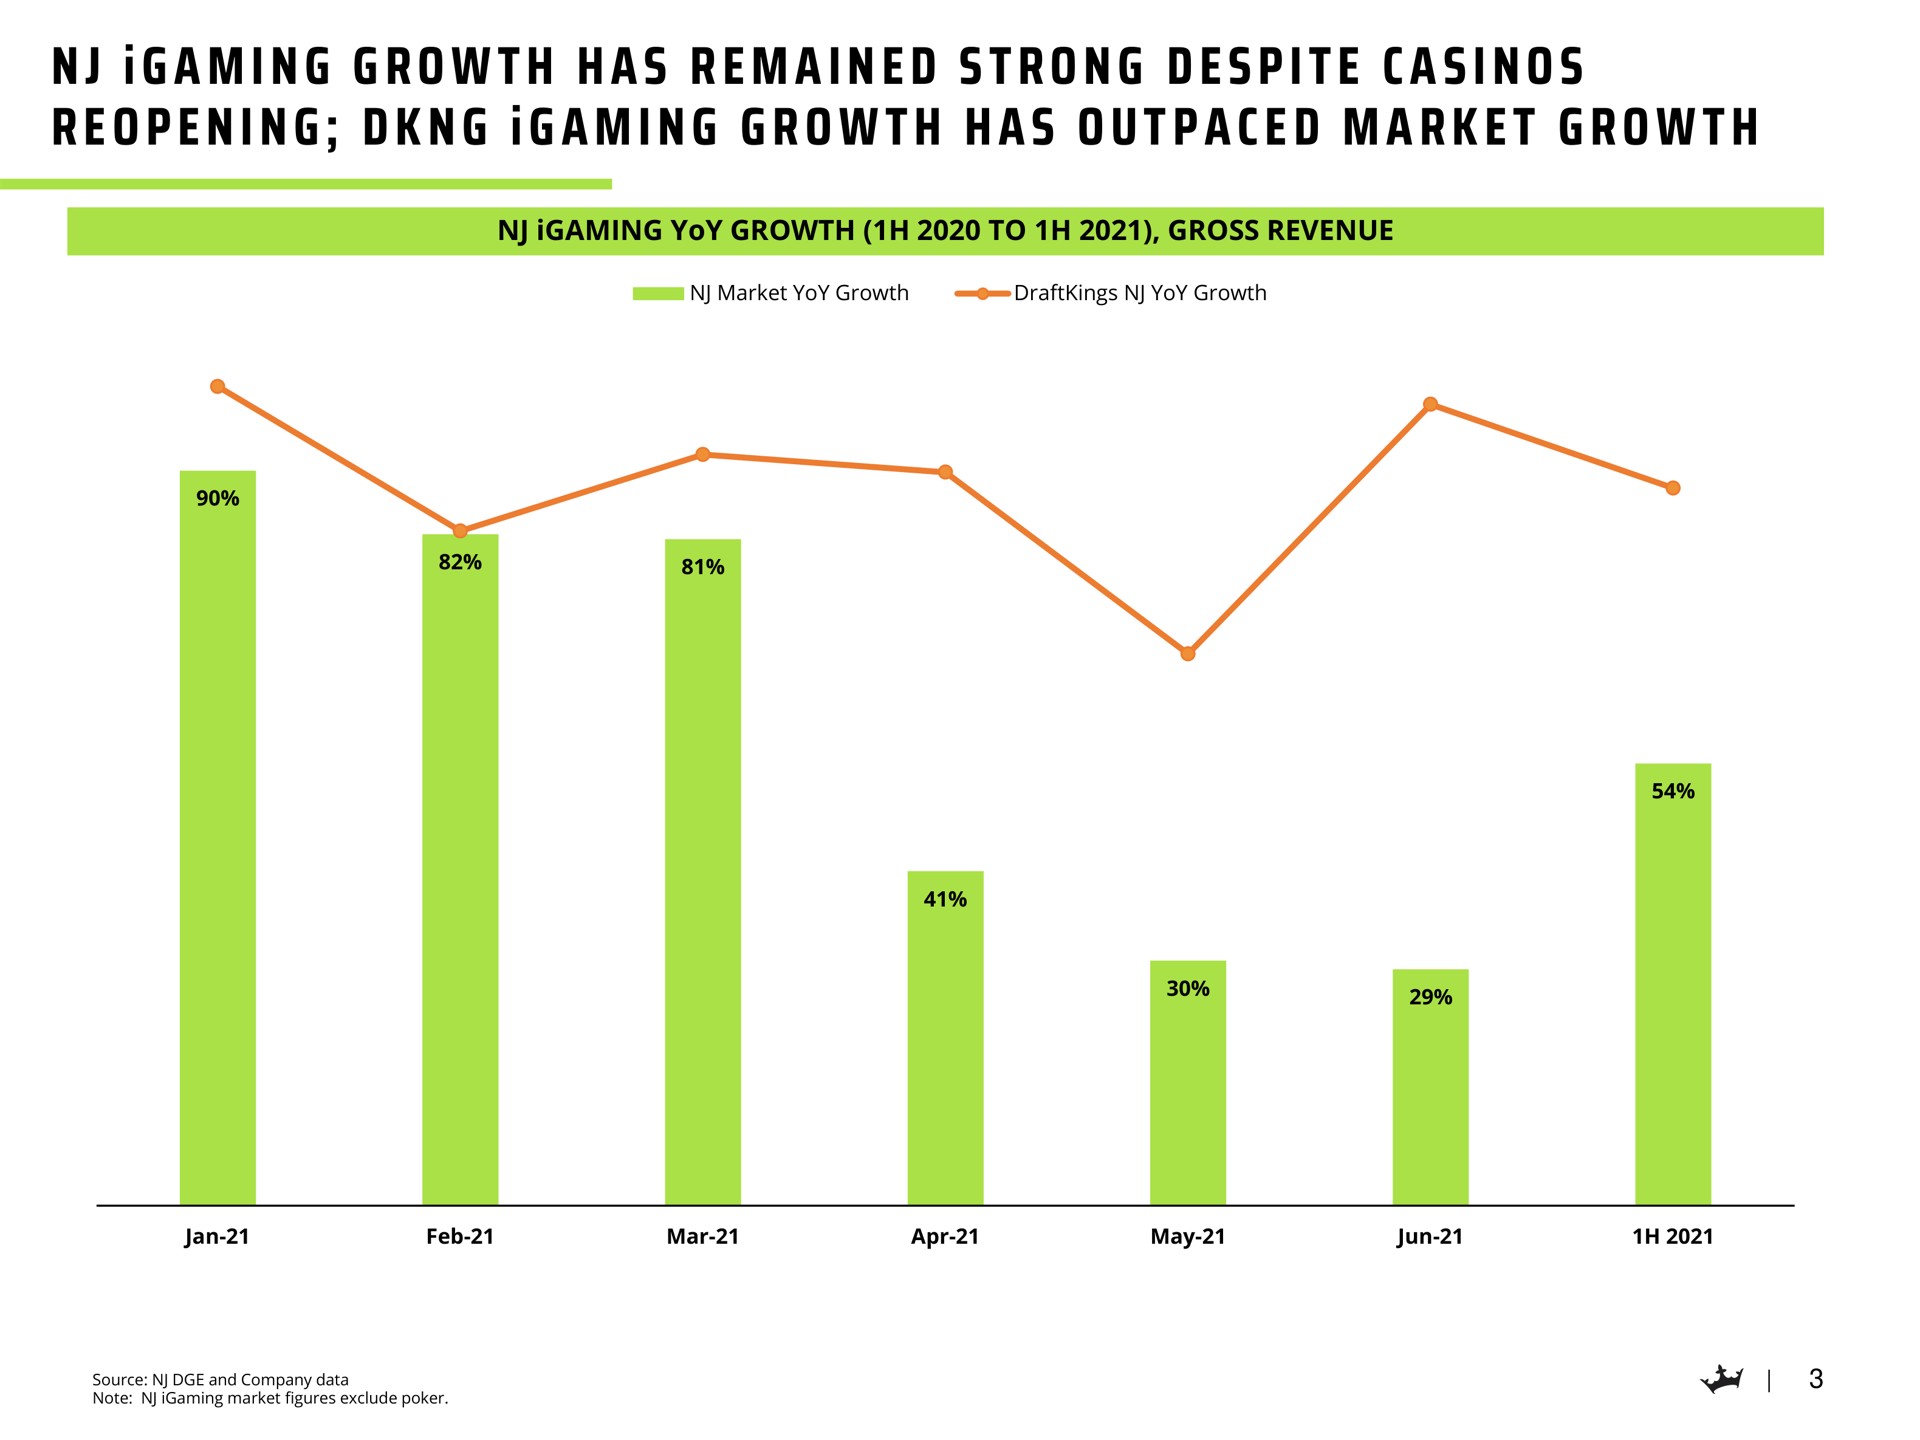 i a i a a i i a i i i a i a a a growth has remained strong despite casinos reopening growth has outpaced market growth | DraftKings